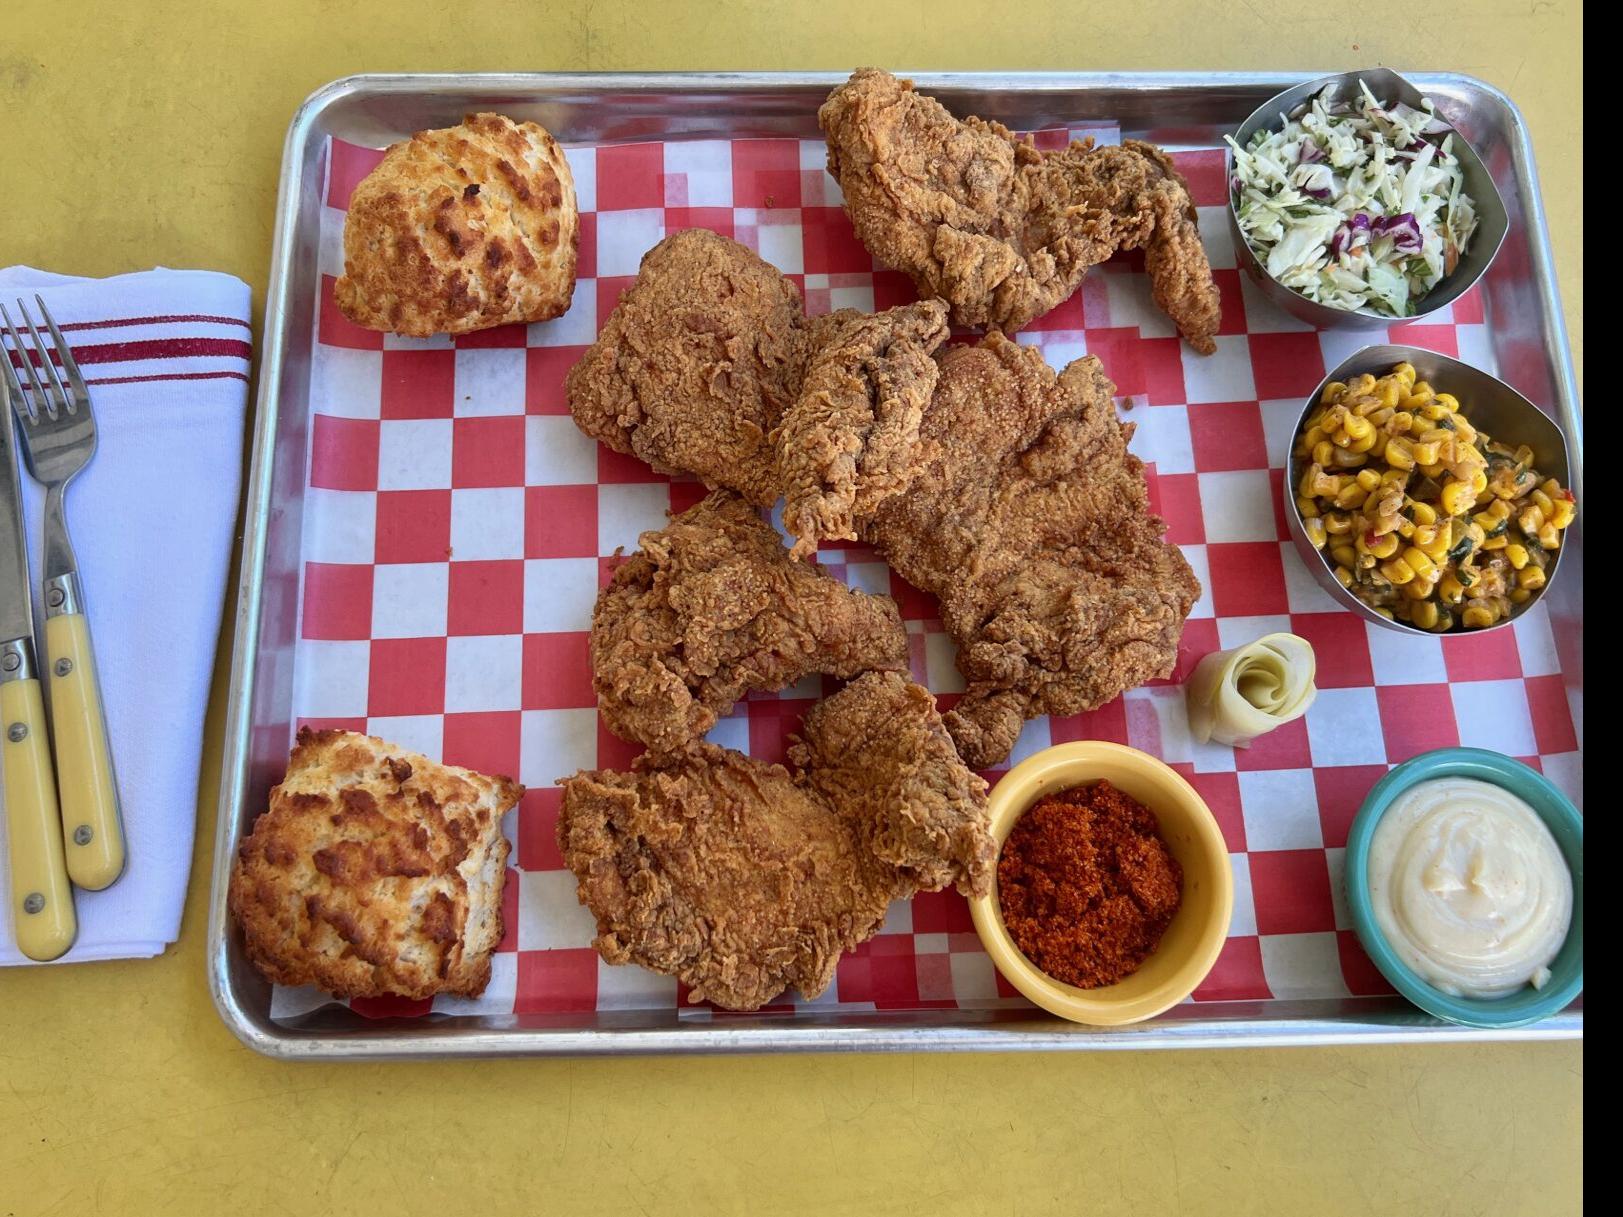 Where to Get Tasty Picnic Fixings in New Orleans